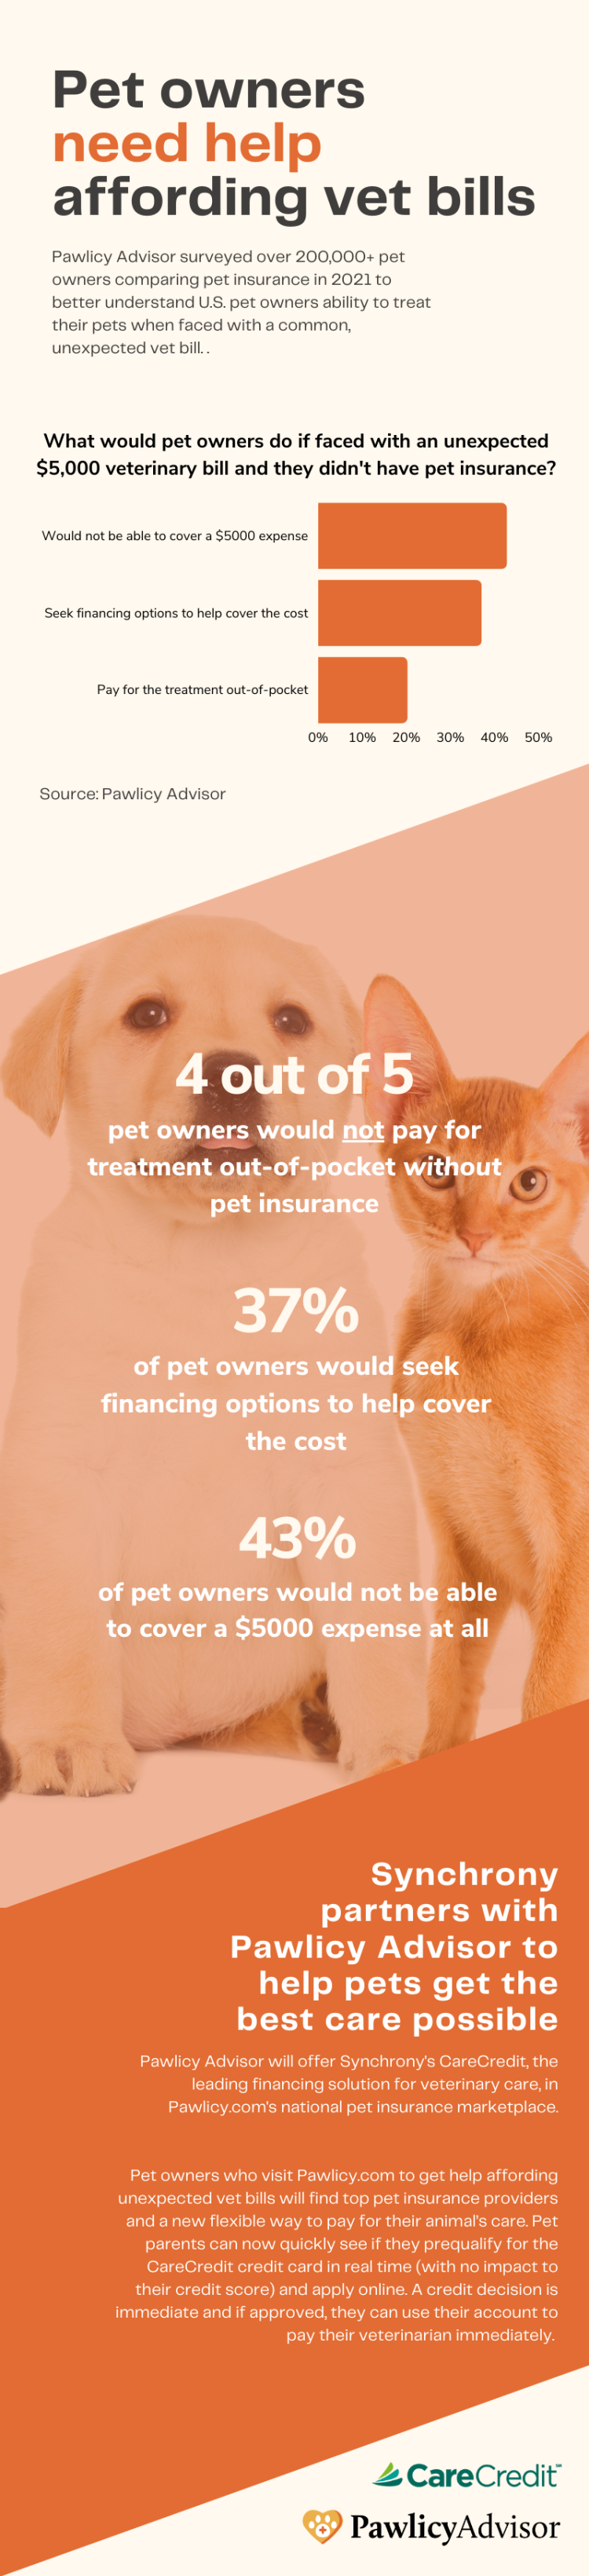 pawlicy + carecredit infographic